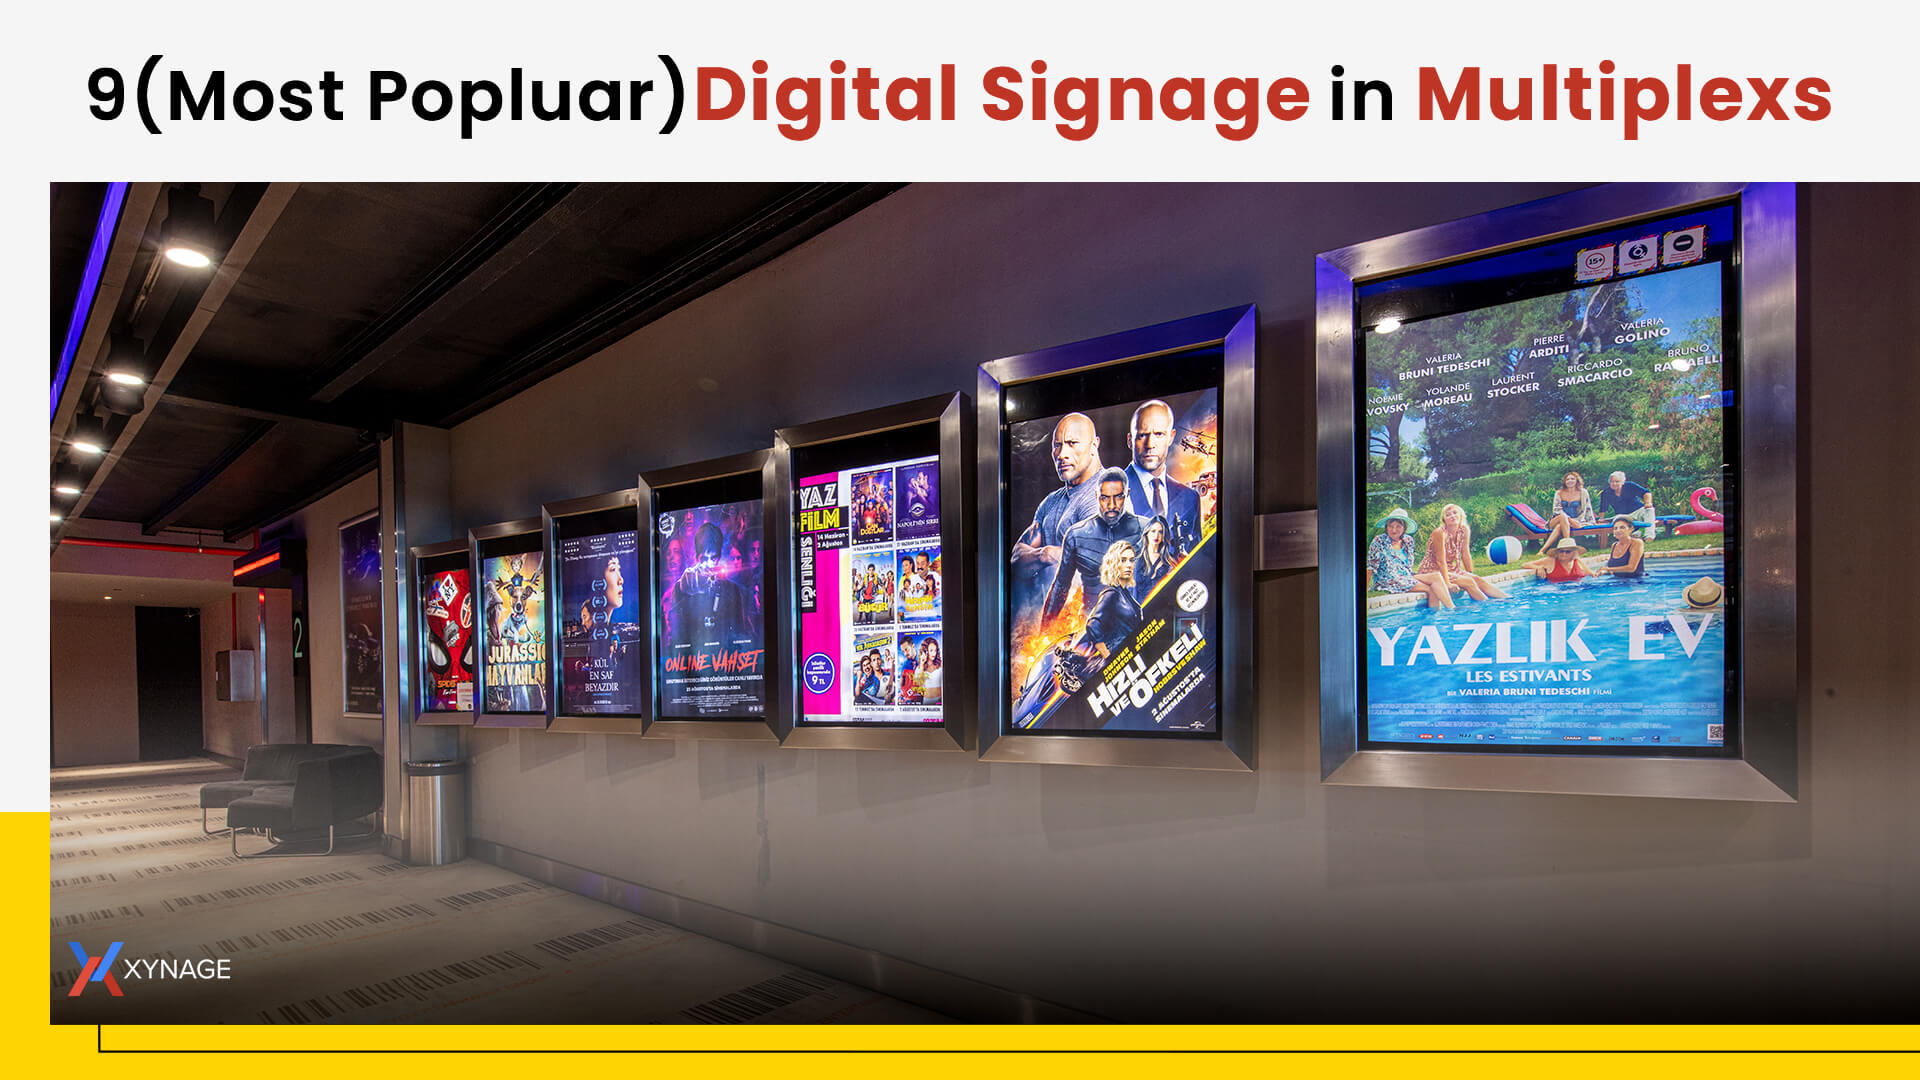 9 (Most Popular) Use Cases of Digital Signage in Movie Theaters